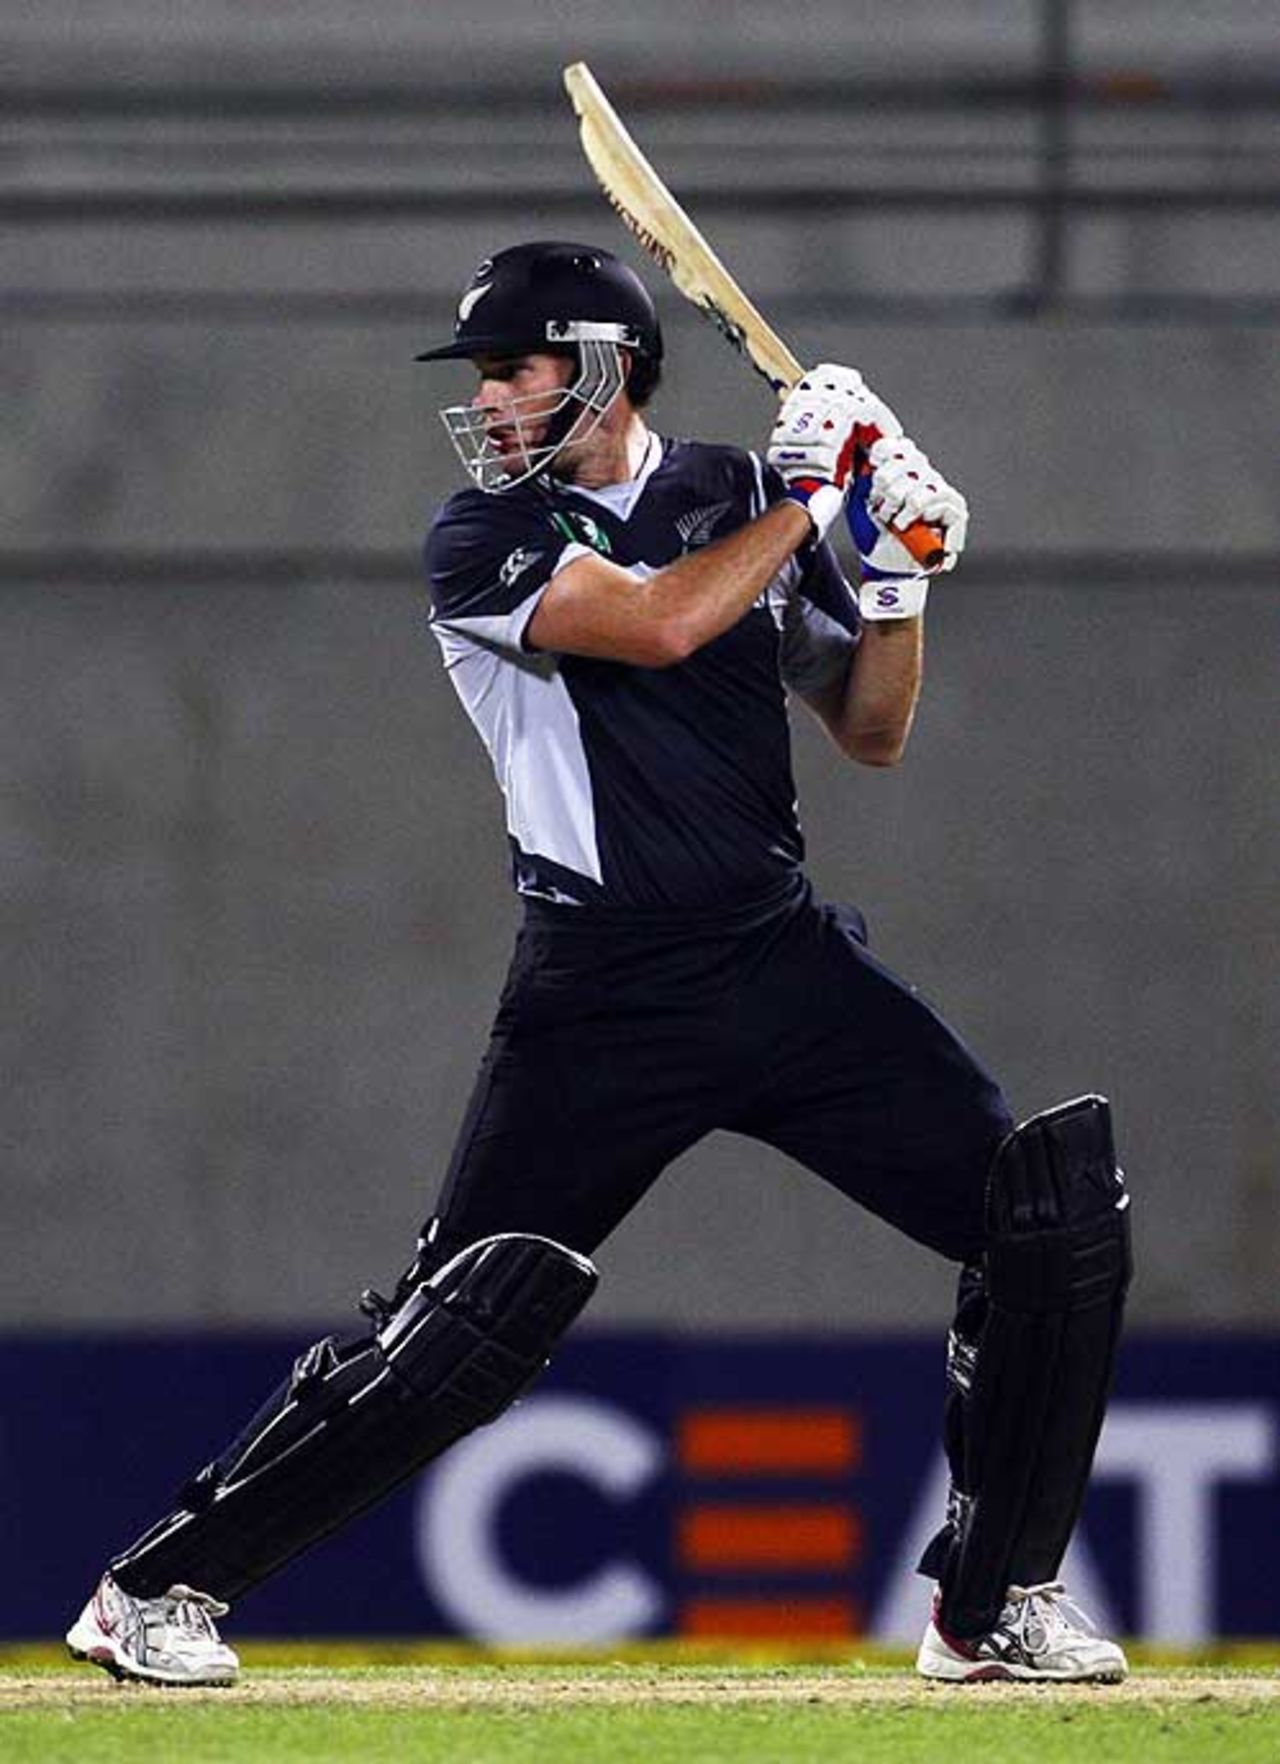 Kyle Mills slaps one during his fifty, New Zealand v India, 3rd ODI, Christchurch, March 8, 2009